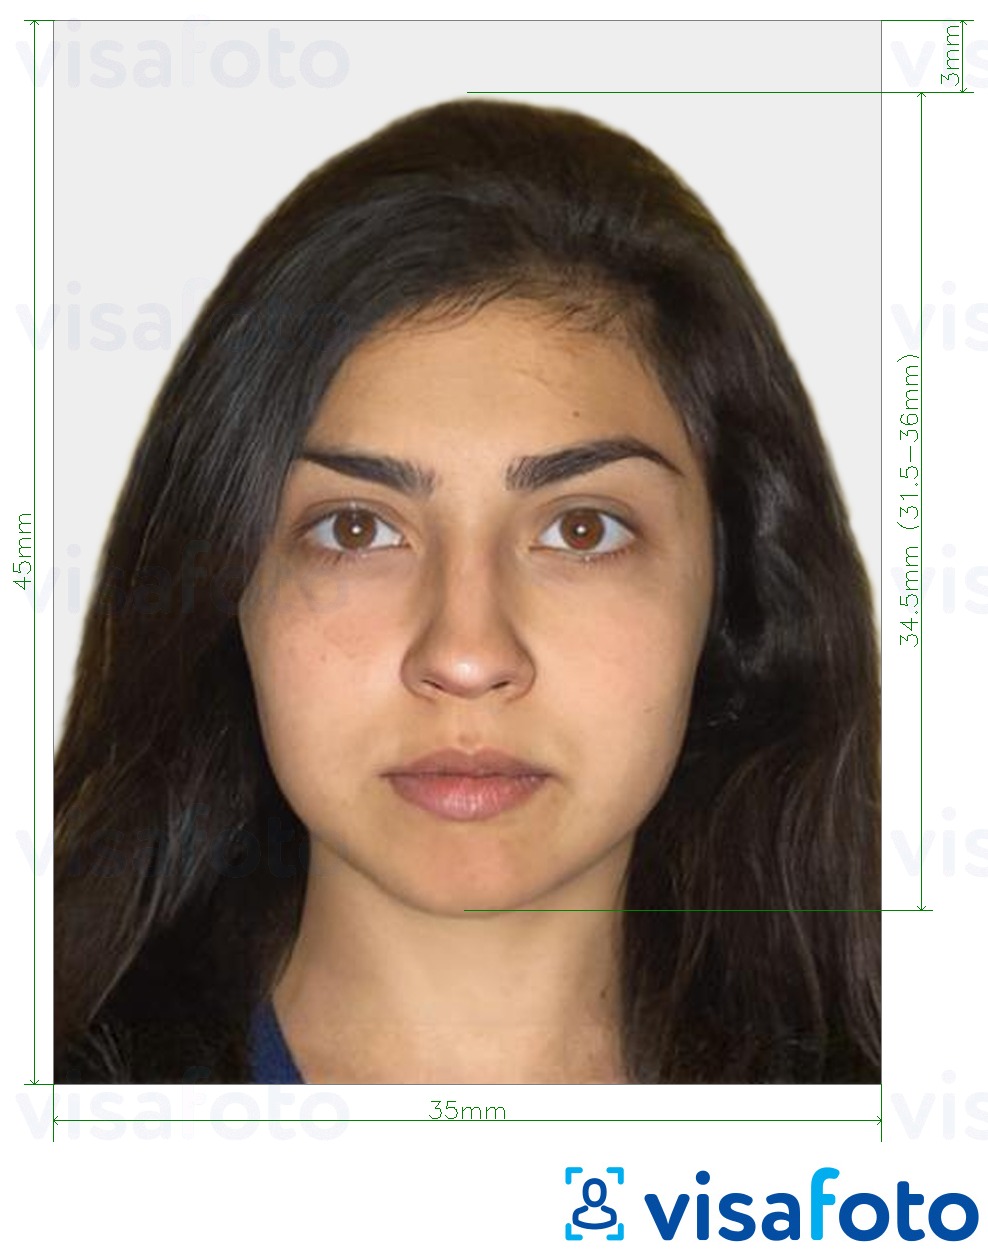 Example of photo for Armenia visa 35x45 mm (3.5x4.5 cm) with exact size specification